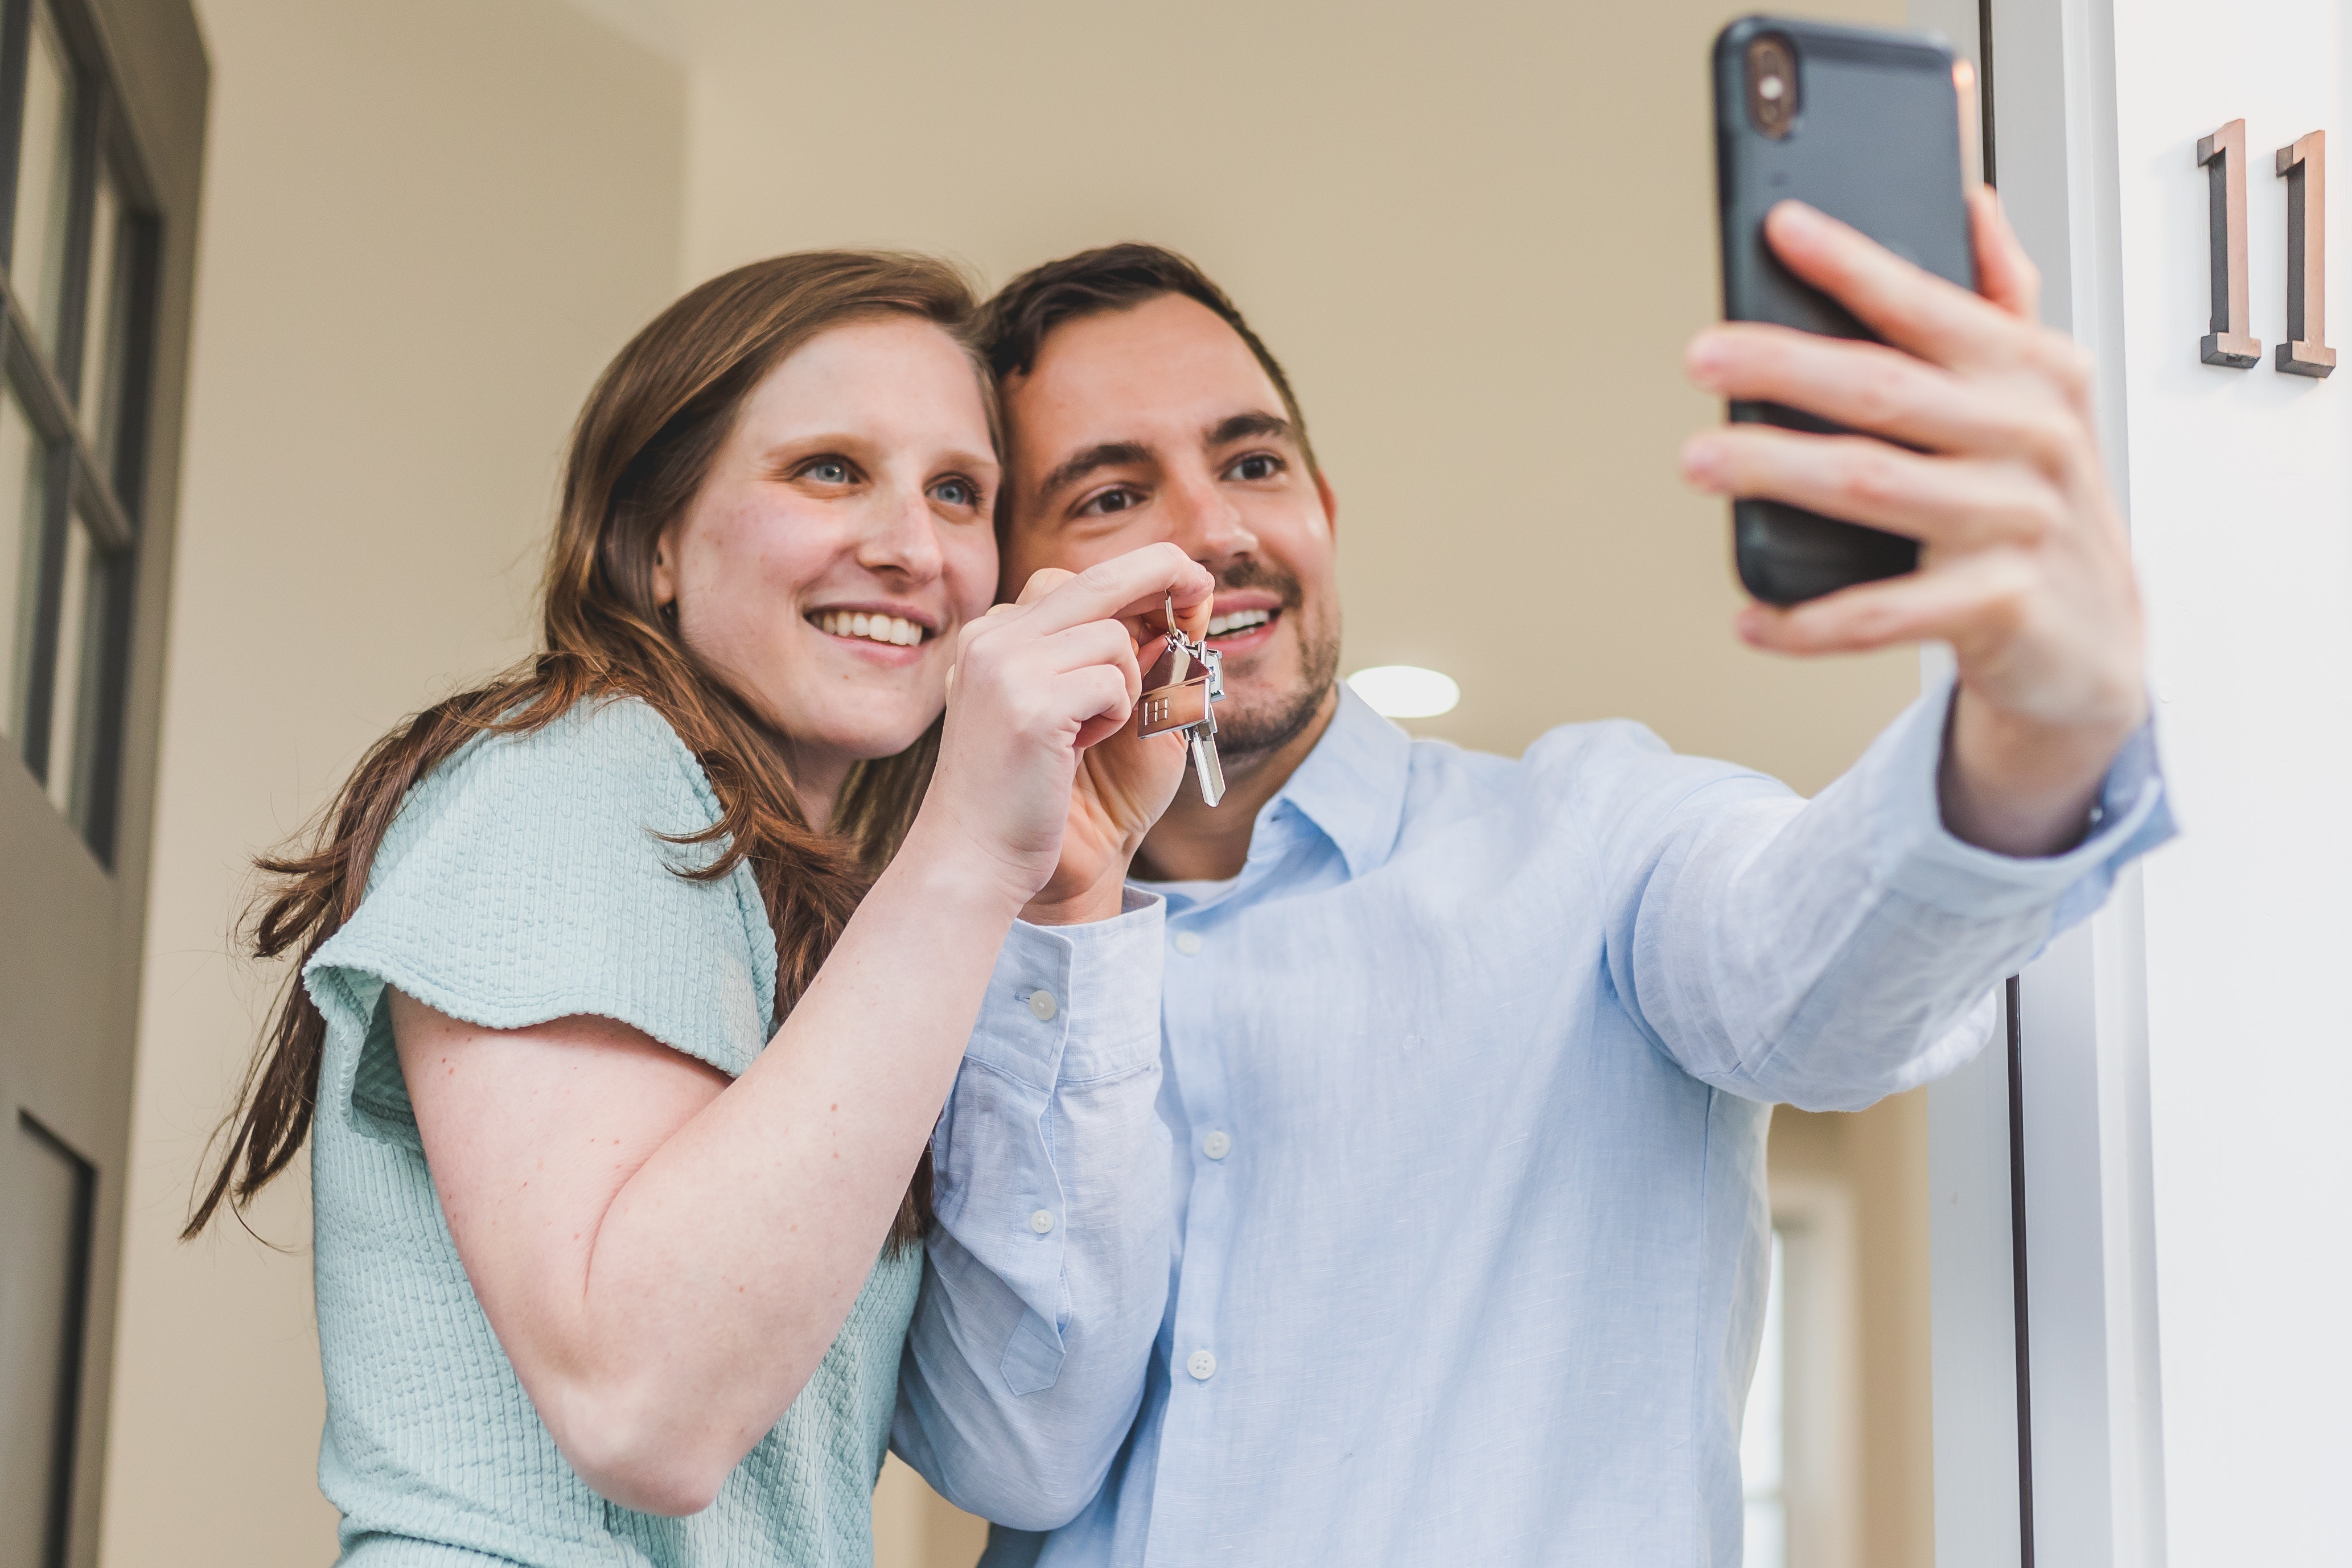 A couple taking a selfie with the keys to their new home.